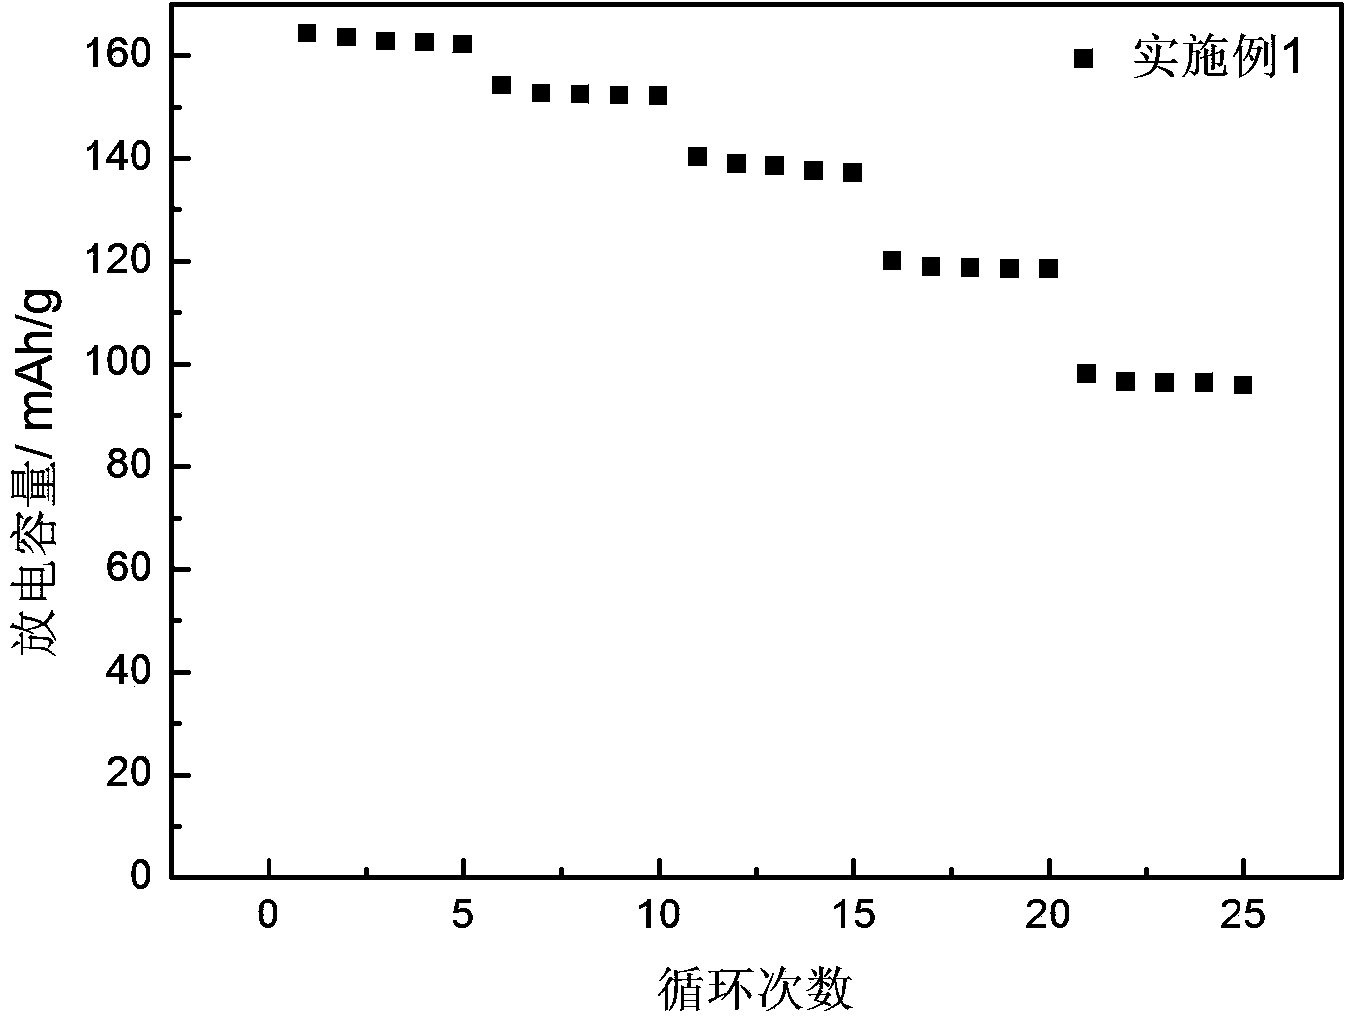 Anion-cation double-doped lithium iron phosphate anode material and preparation method thereof